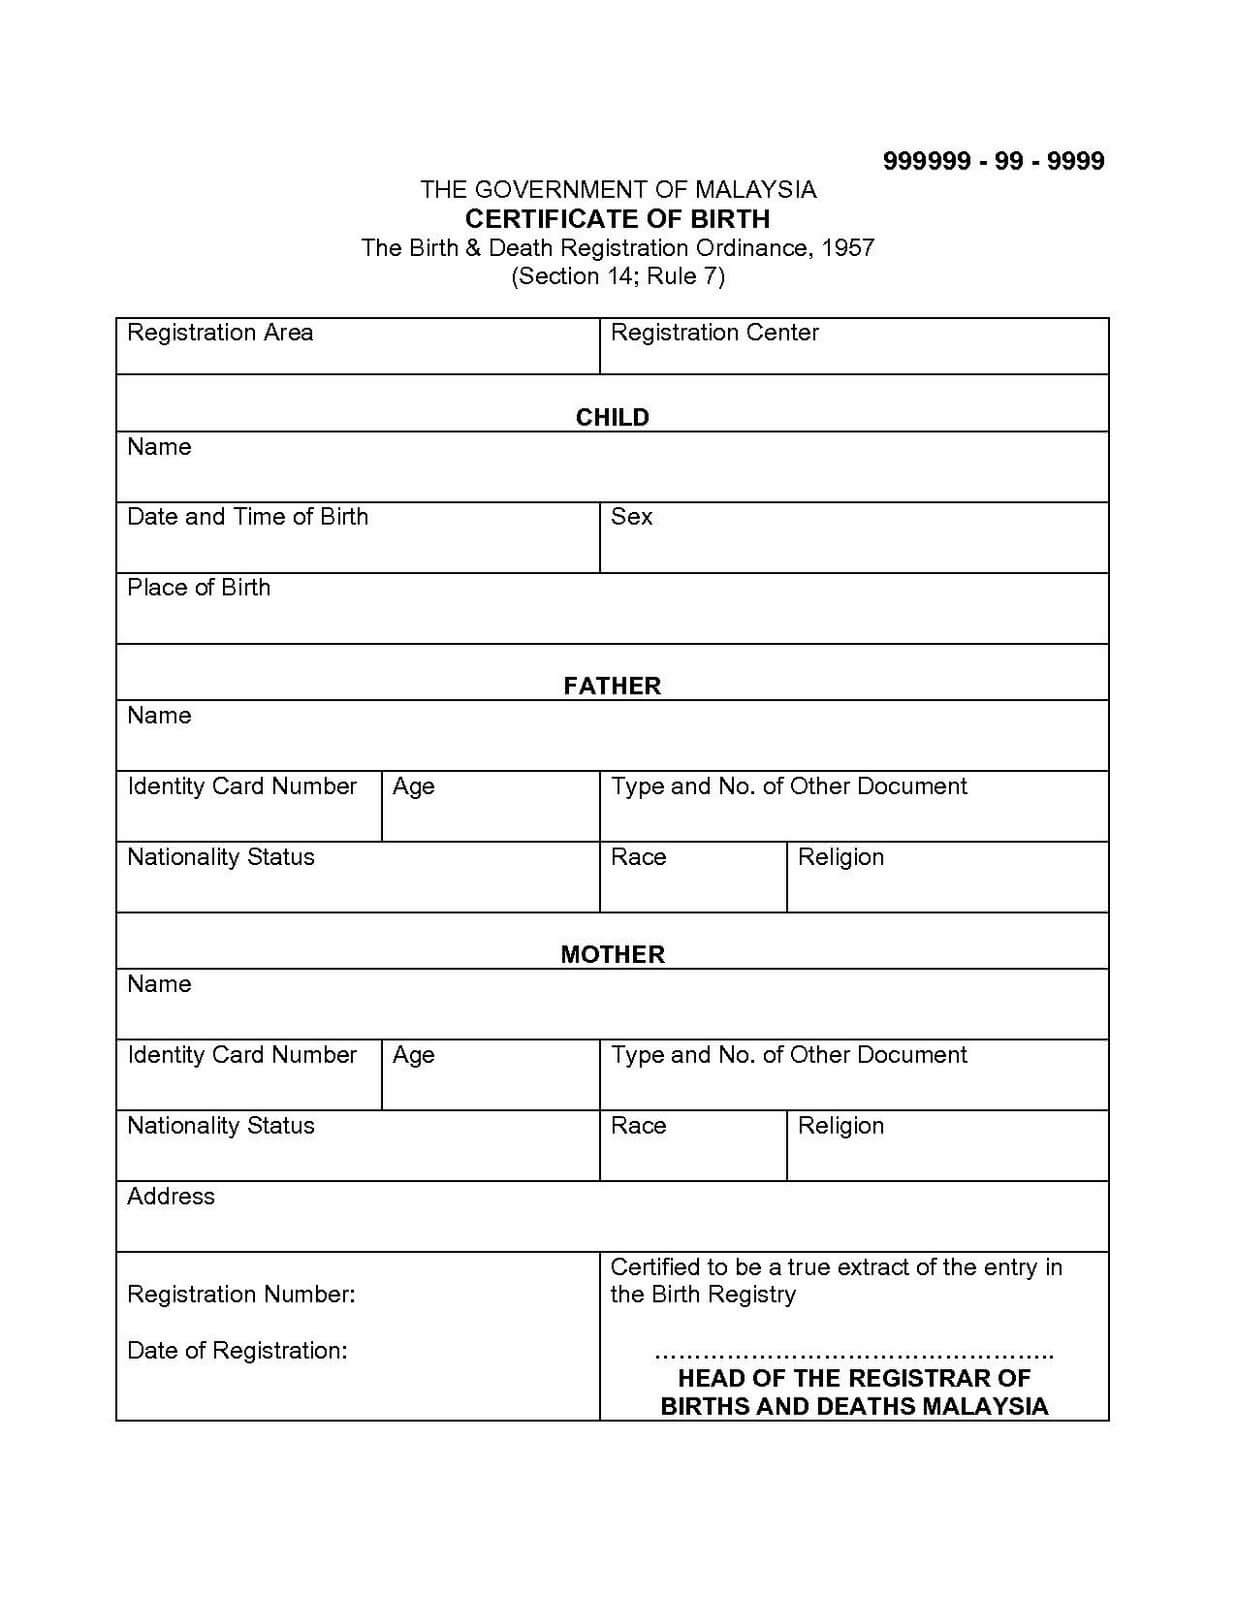 Marriage Certificate Doc Ukran Agdiffusion Com Translate Within Marriage Certificate Translation From Spanish To English Template